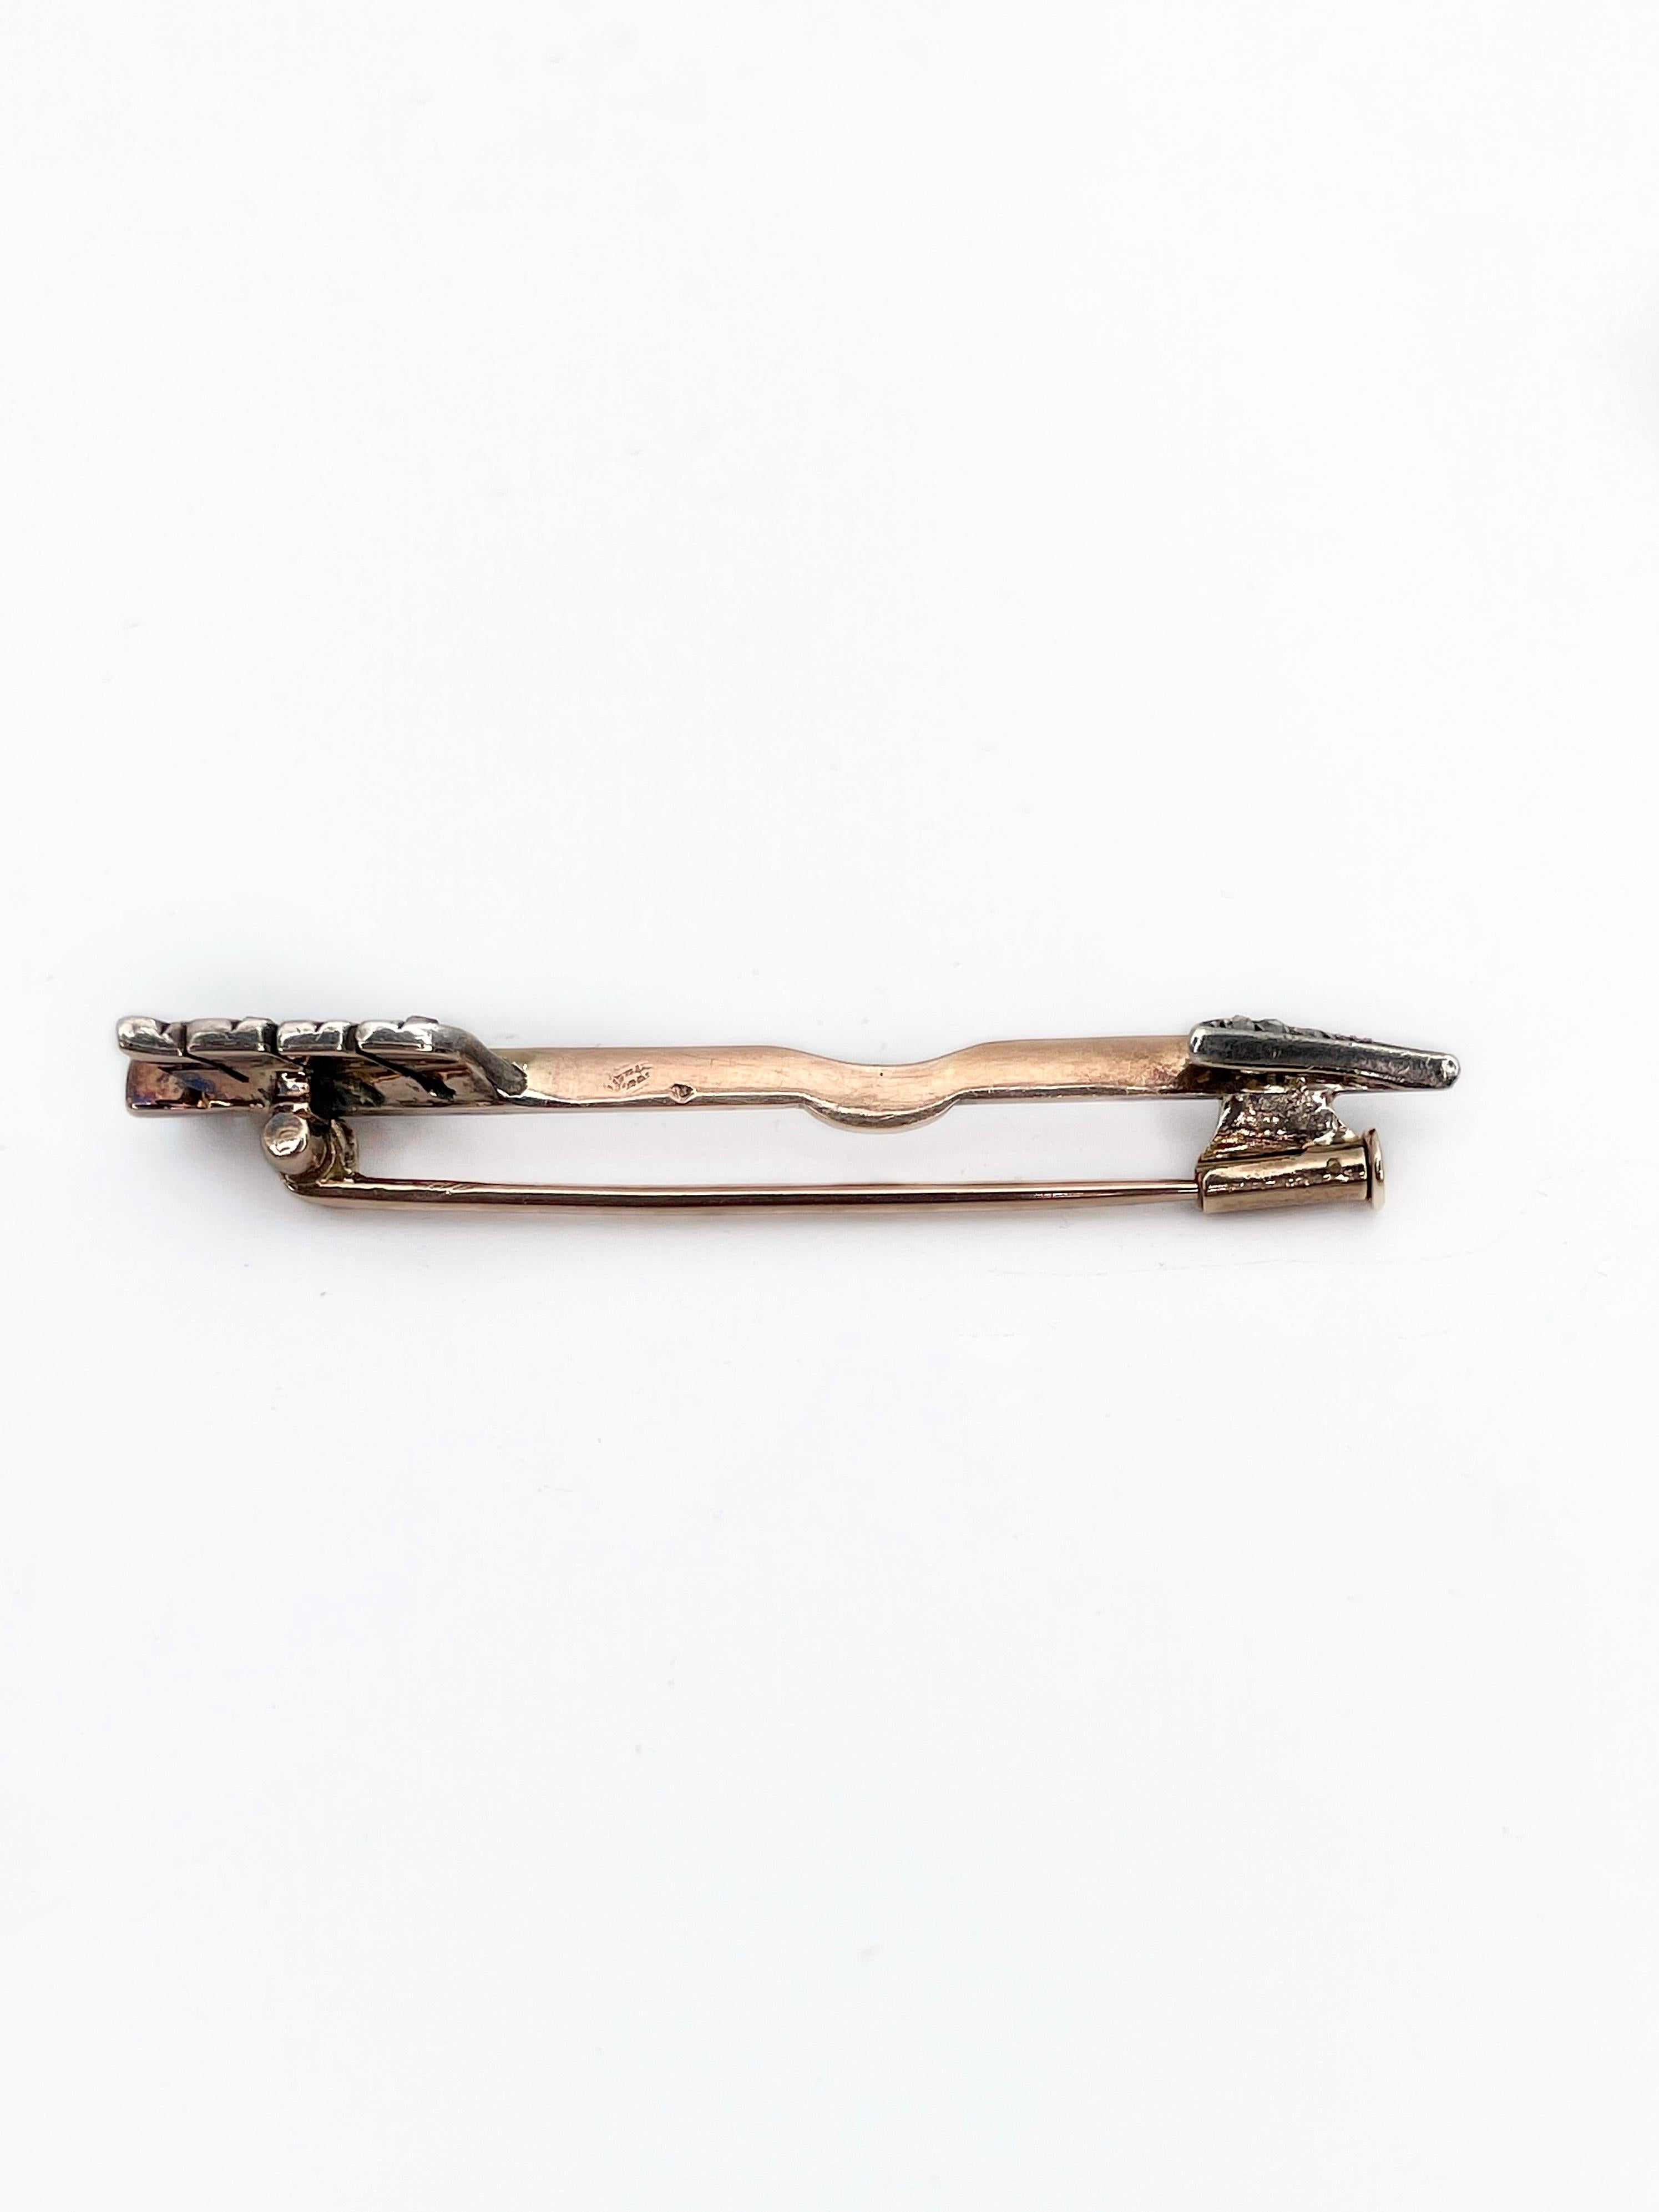 This is a lovely Victorian arrow bar brooch crafted in 14K rose gold in early XX century. The piece is adorned with silver. It features 24 rose cut diamonds. 

The bar has a decorative curve in the middle which gives the brooch more dynamic. You can